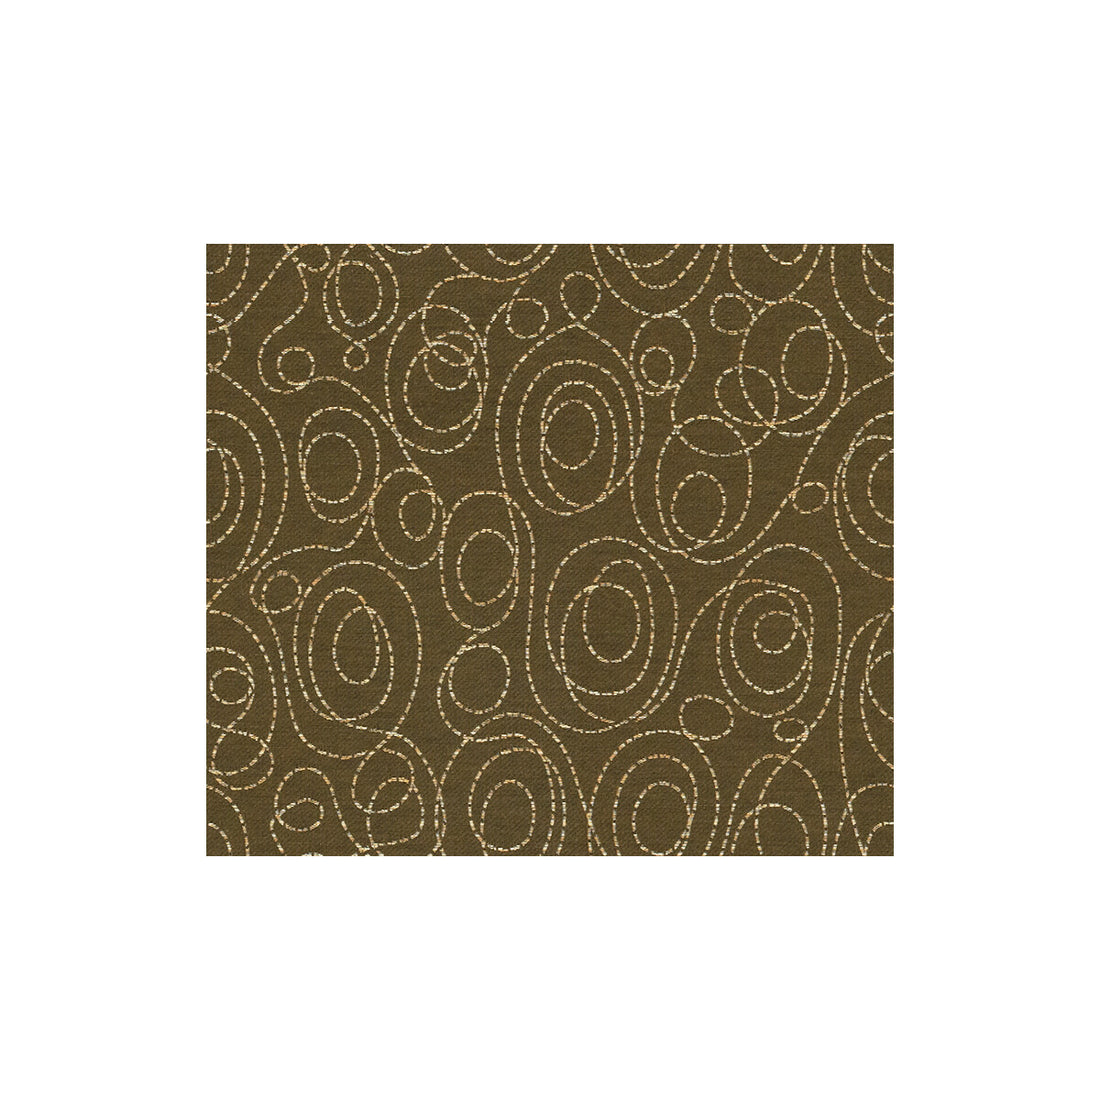 Winding Road fabric in shadow color - pattern 32844.6.0 - by Kravet Contract in the Contract Gis collection